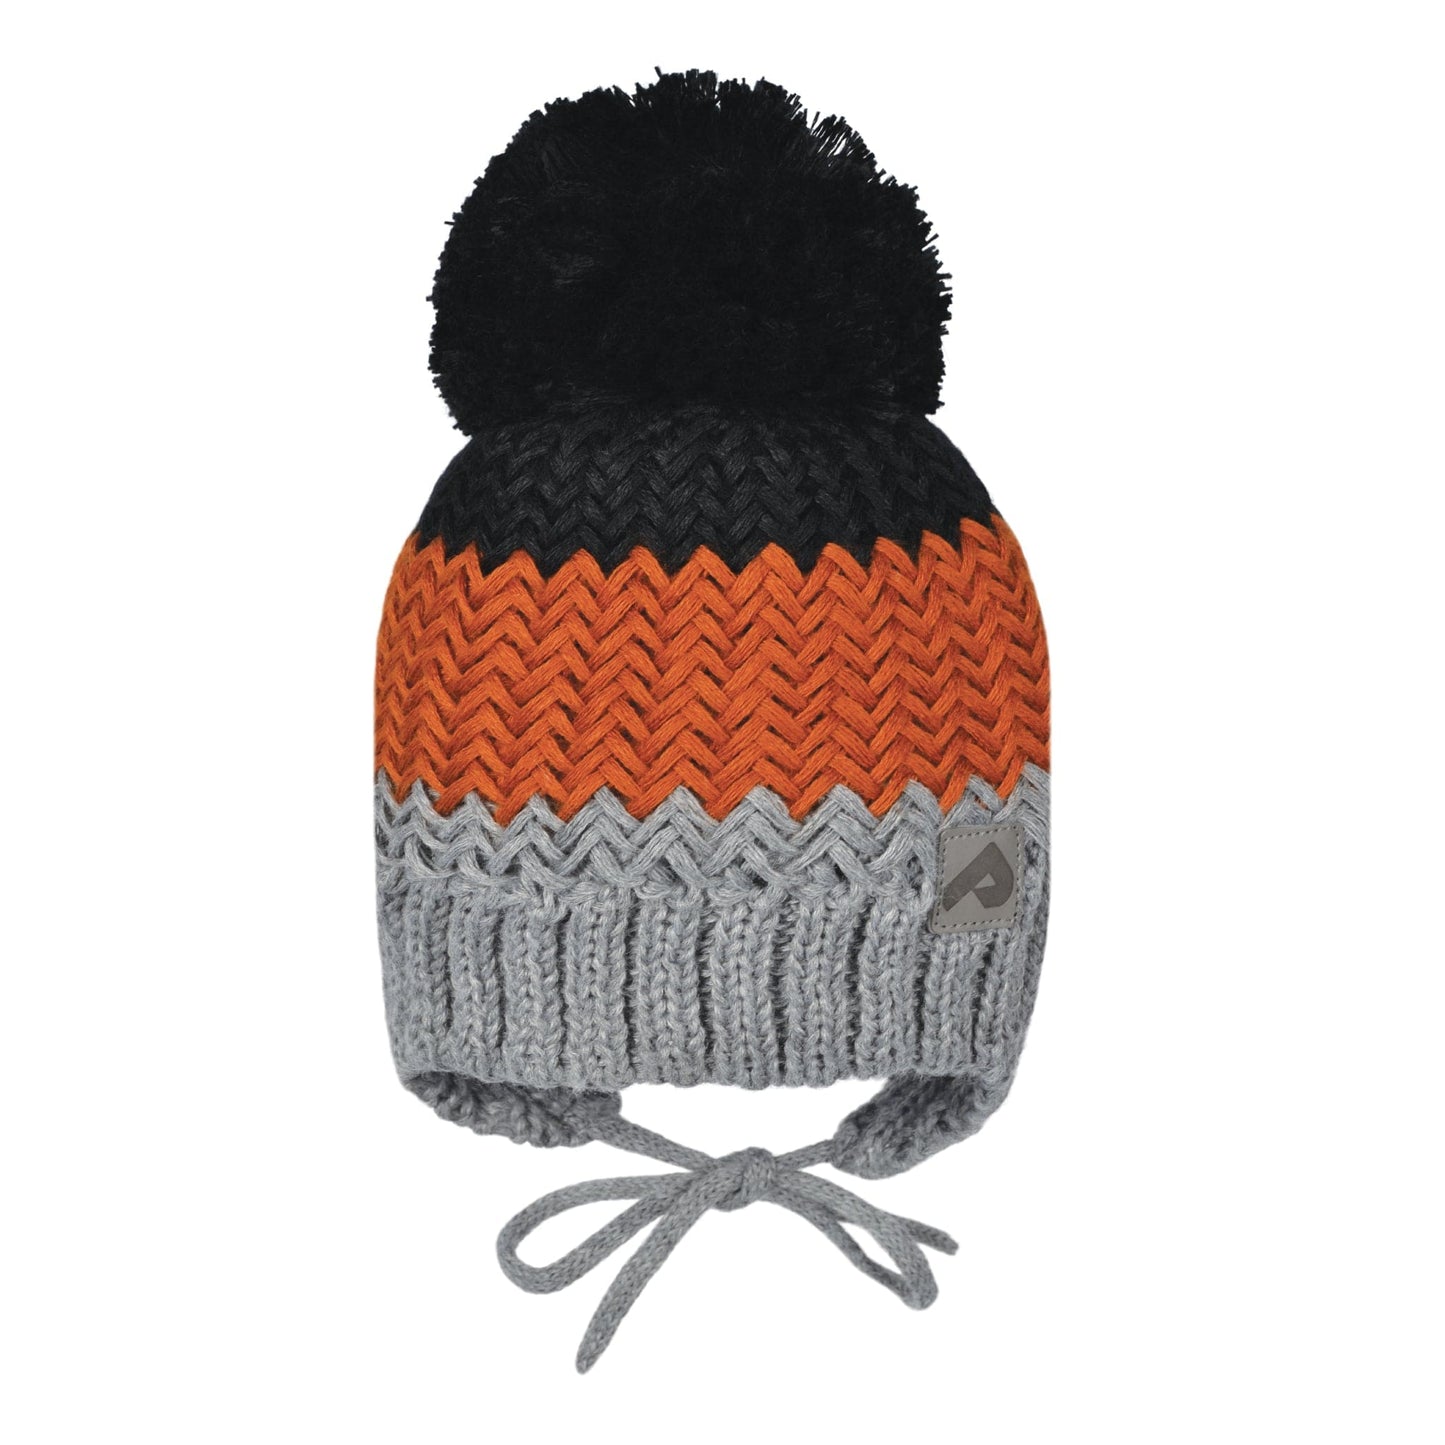 Winter hat with strings - Gray & Orange